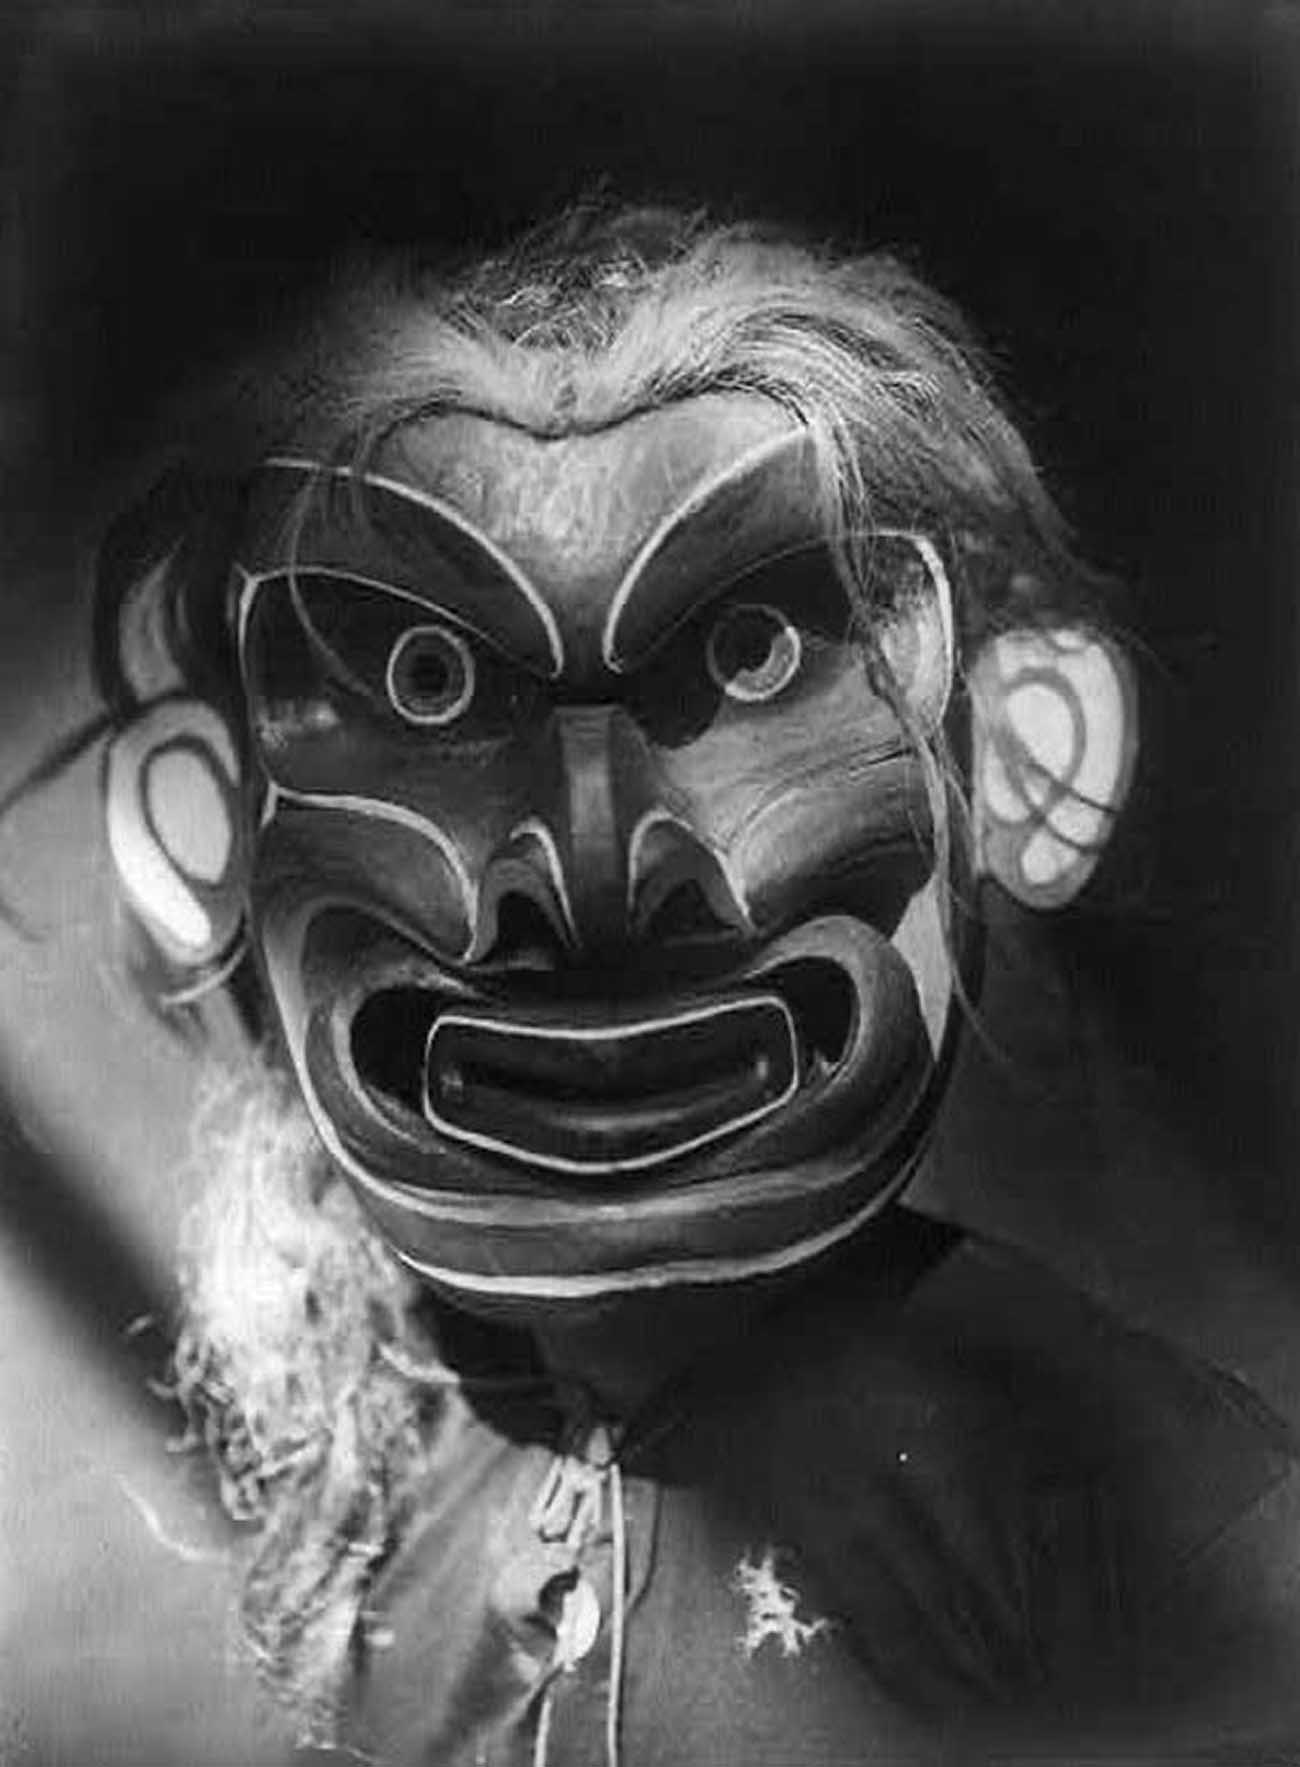 Kwakiutl person wearing the mask of mythical creature Pgwis (man of the sea).